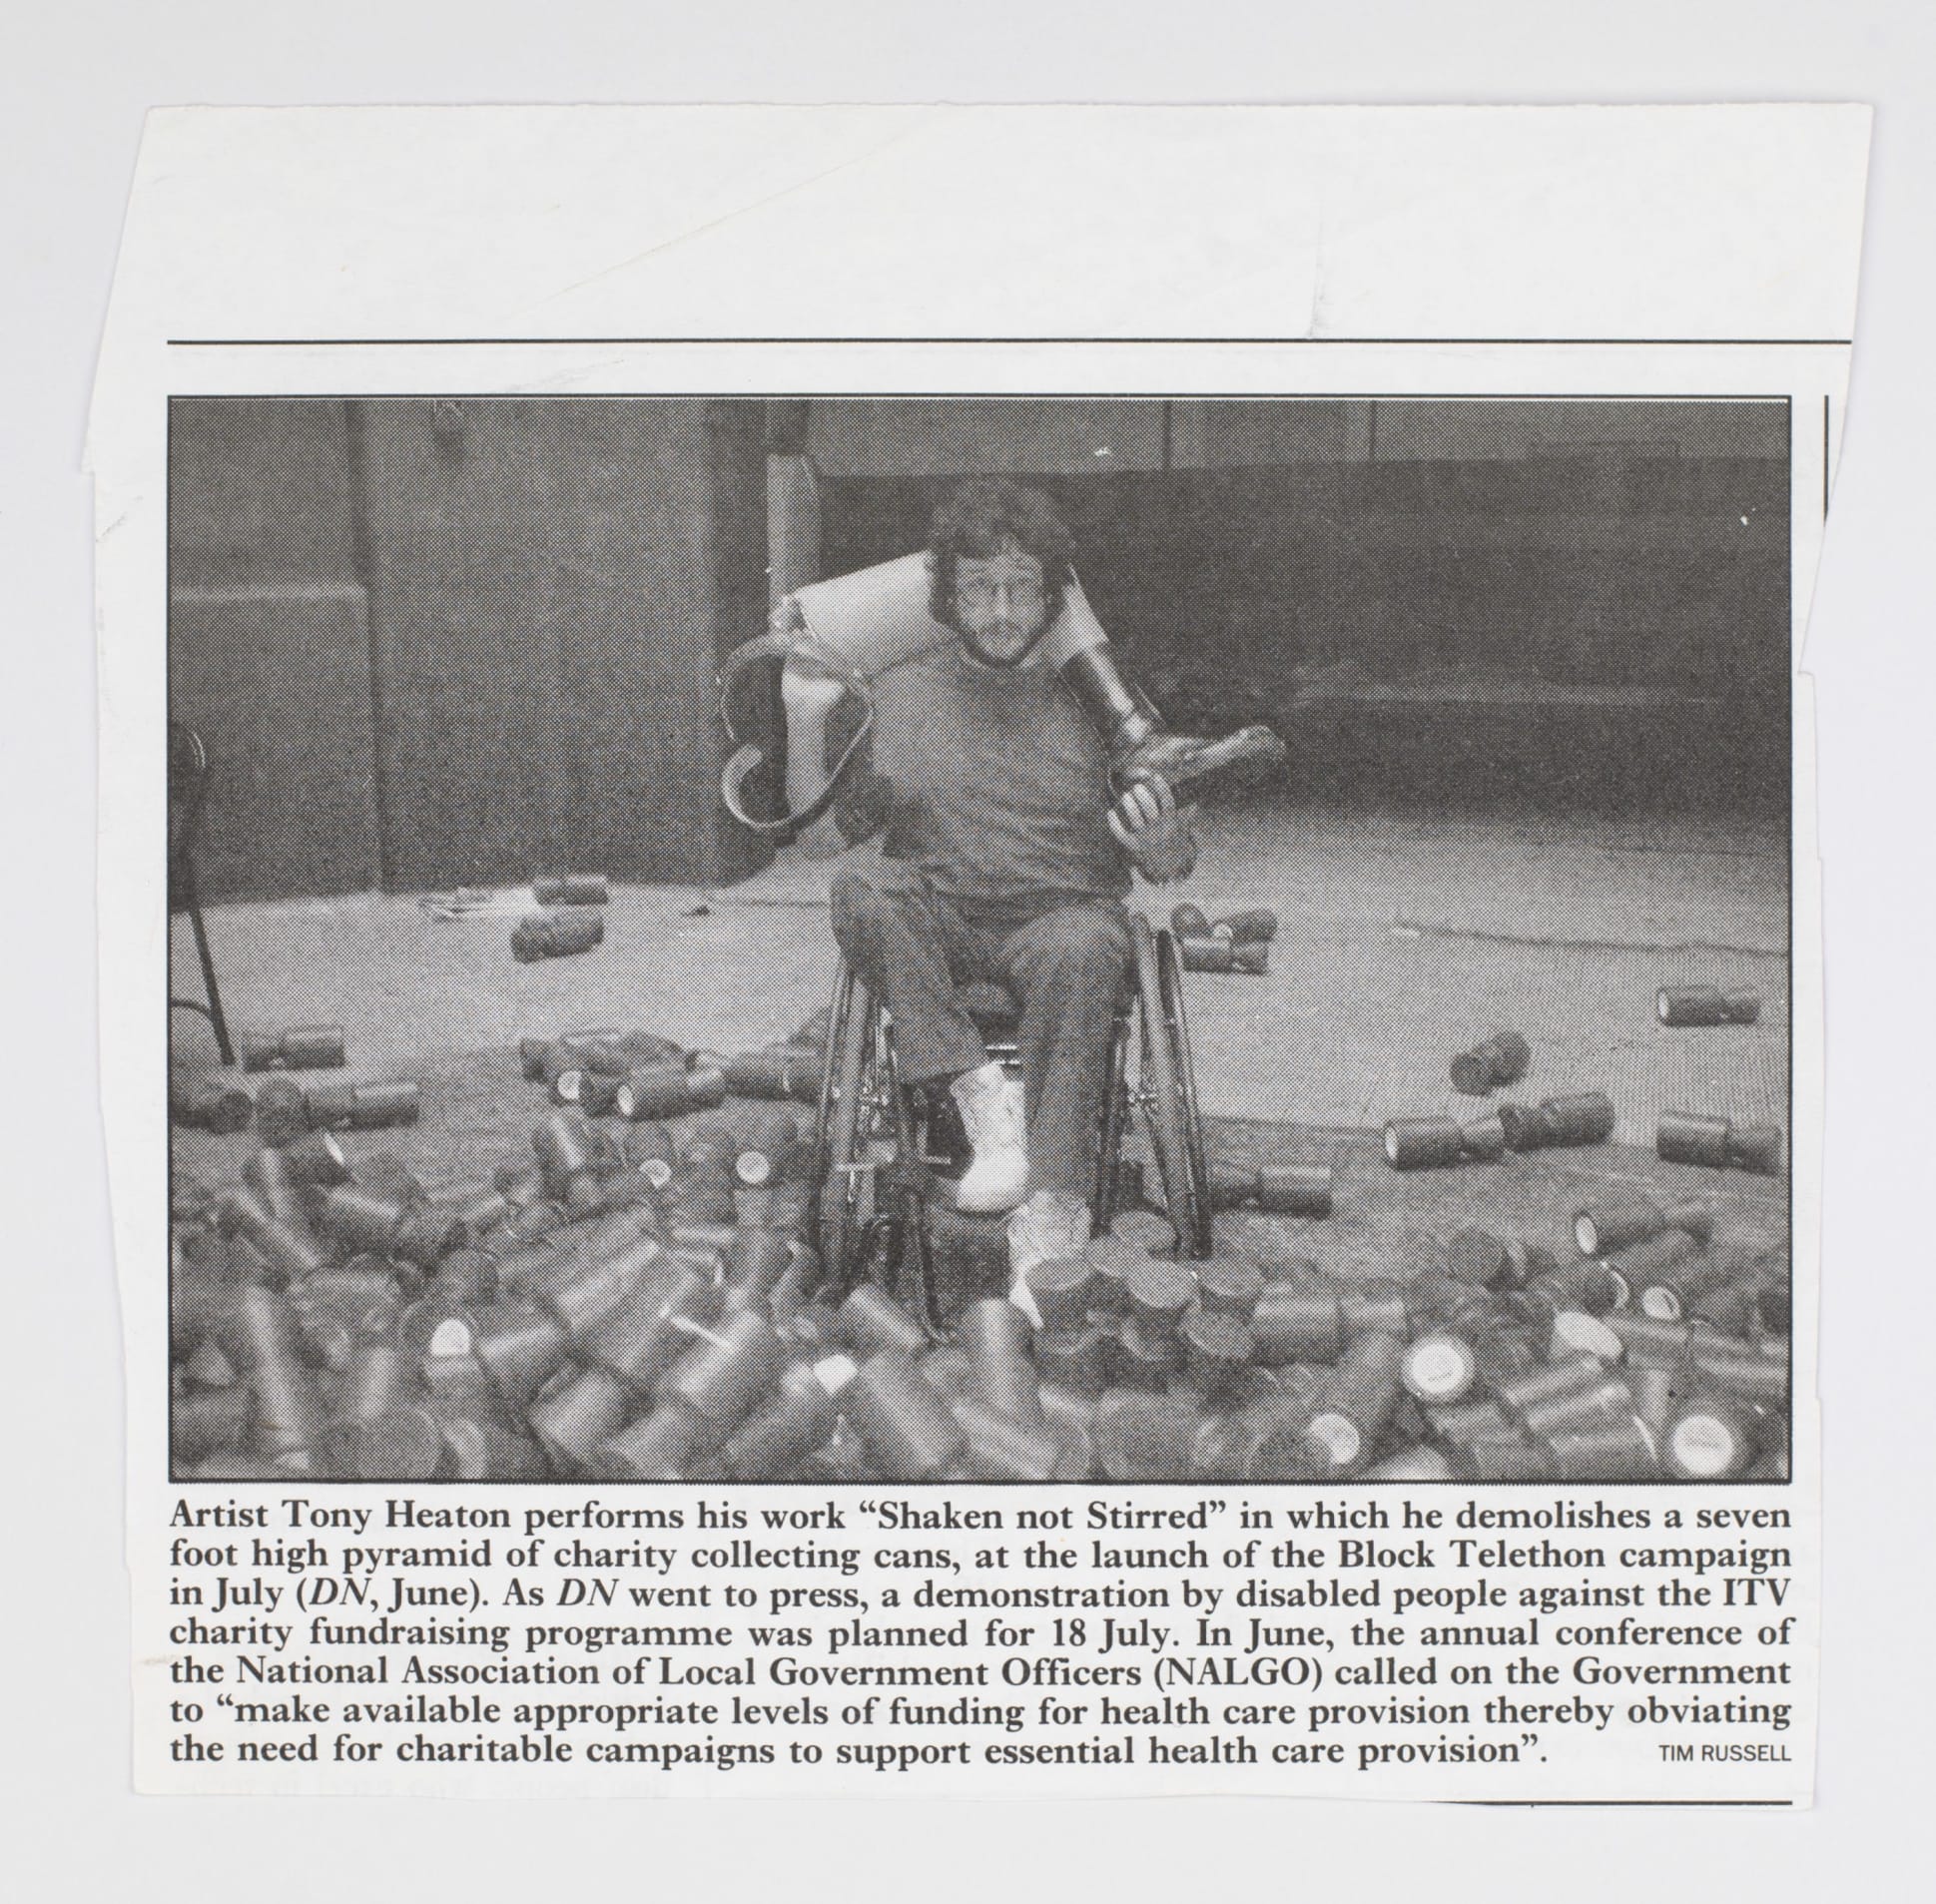 Black and white newspaper image of a young white man sitting in a wheelchair with a prosthetic leg slung over his shoulders. He is surrounded by knocked-over charity collecting cans